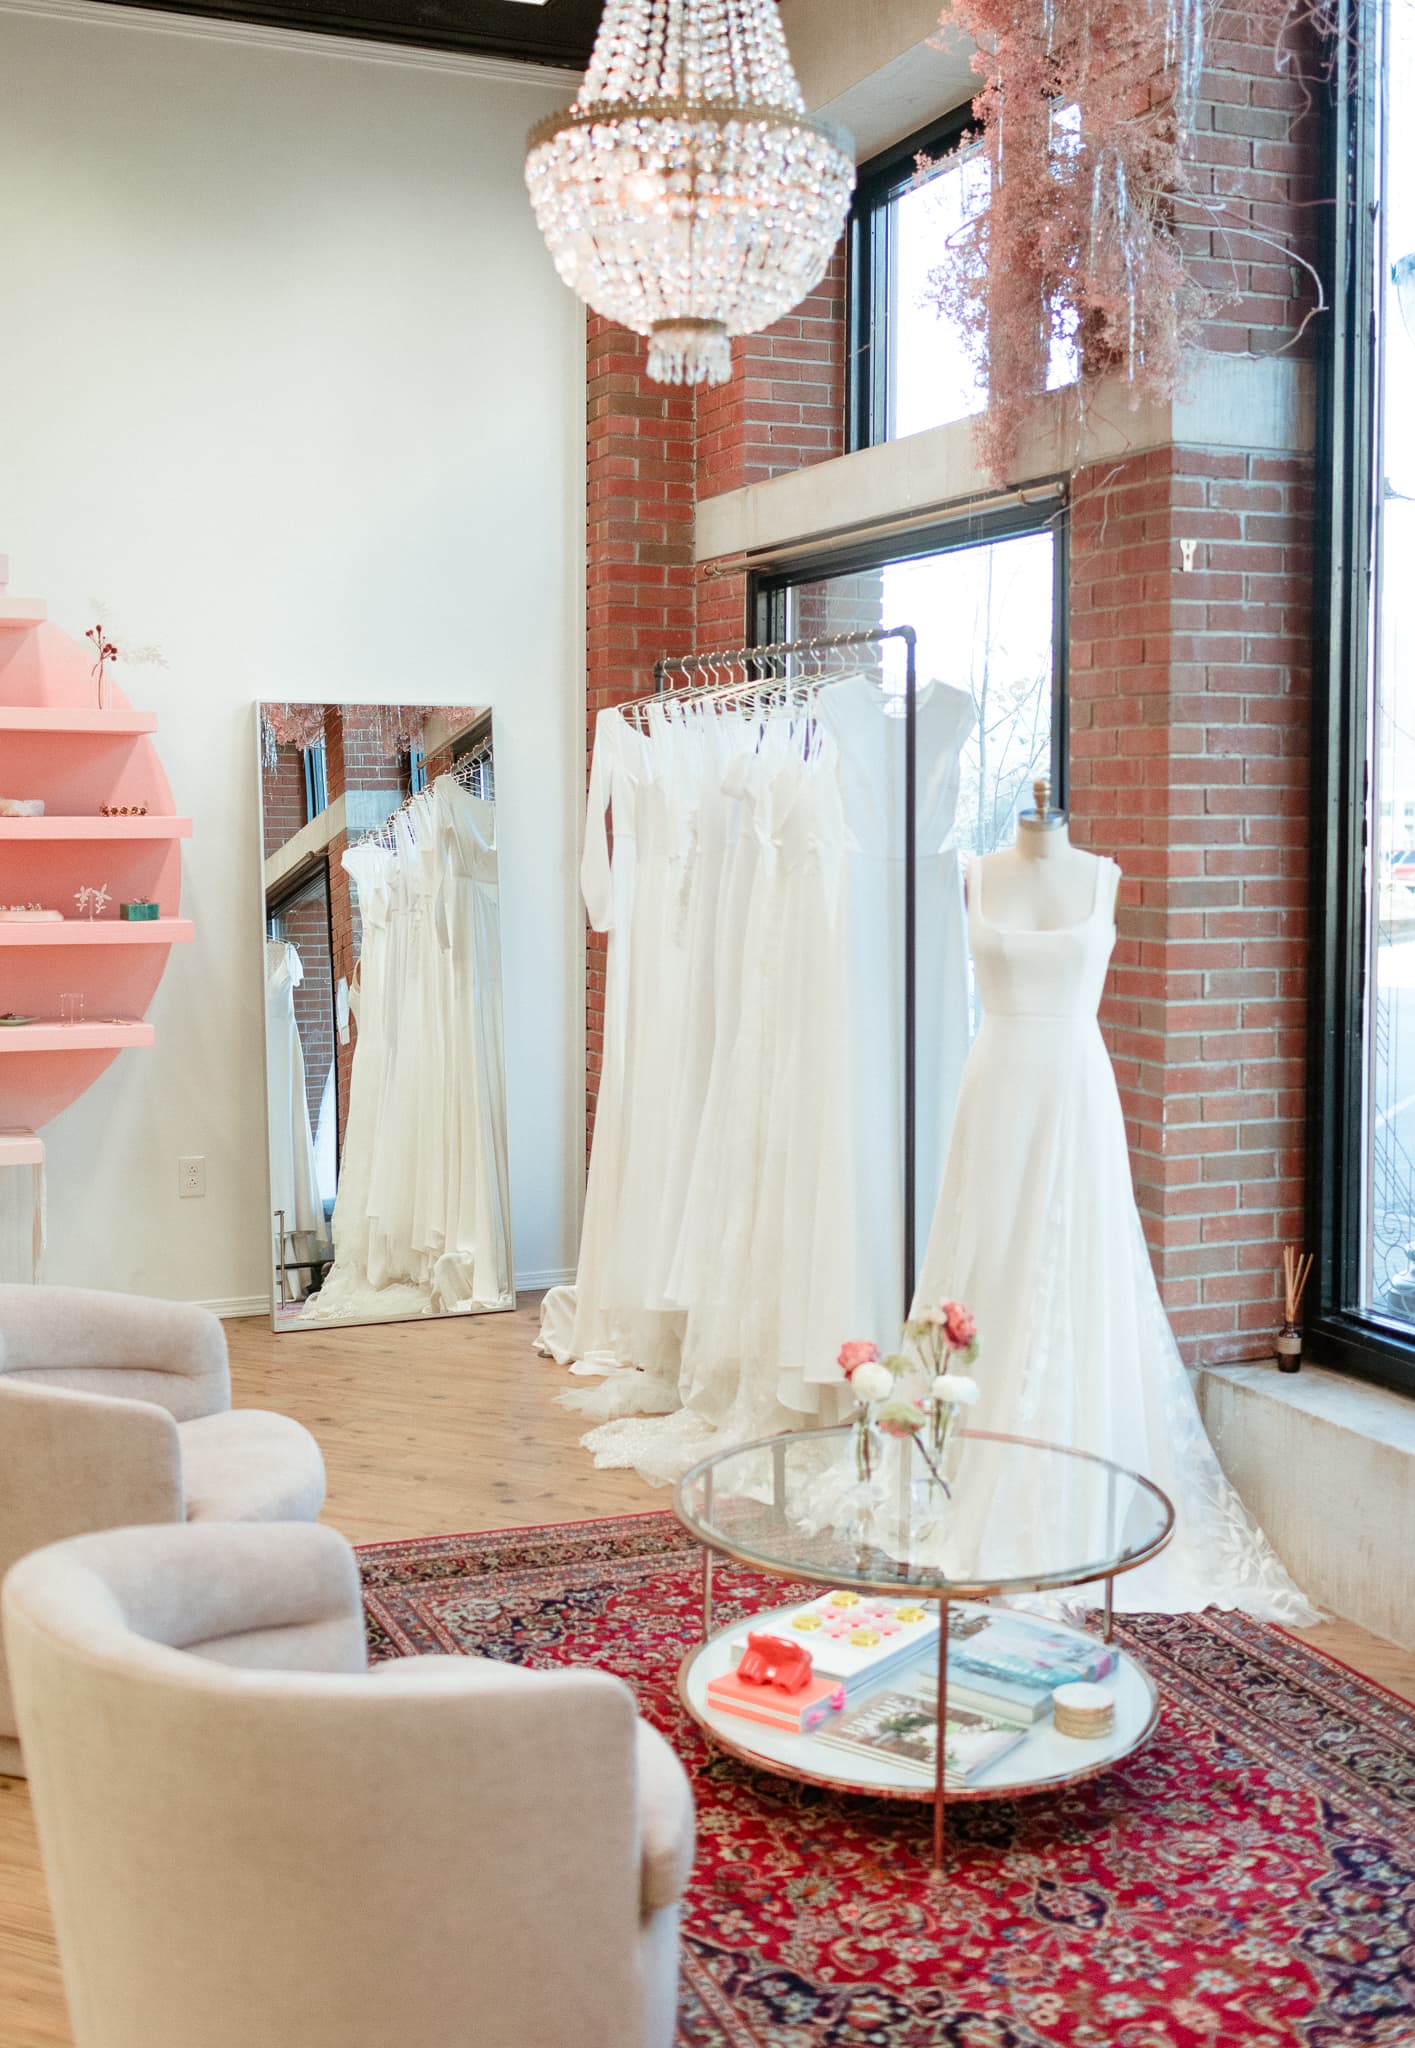 Joon Bridal // by appointment only - Fayetteville, AR, US, blossom bridal